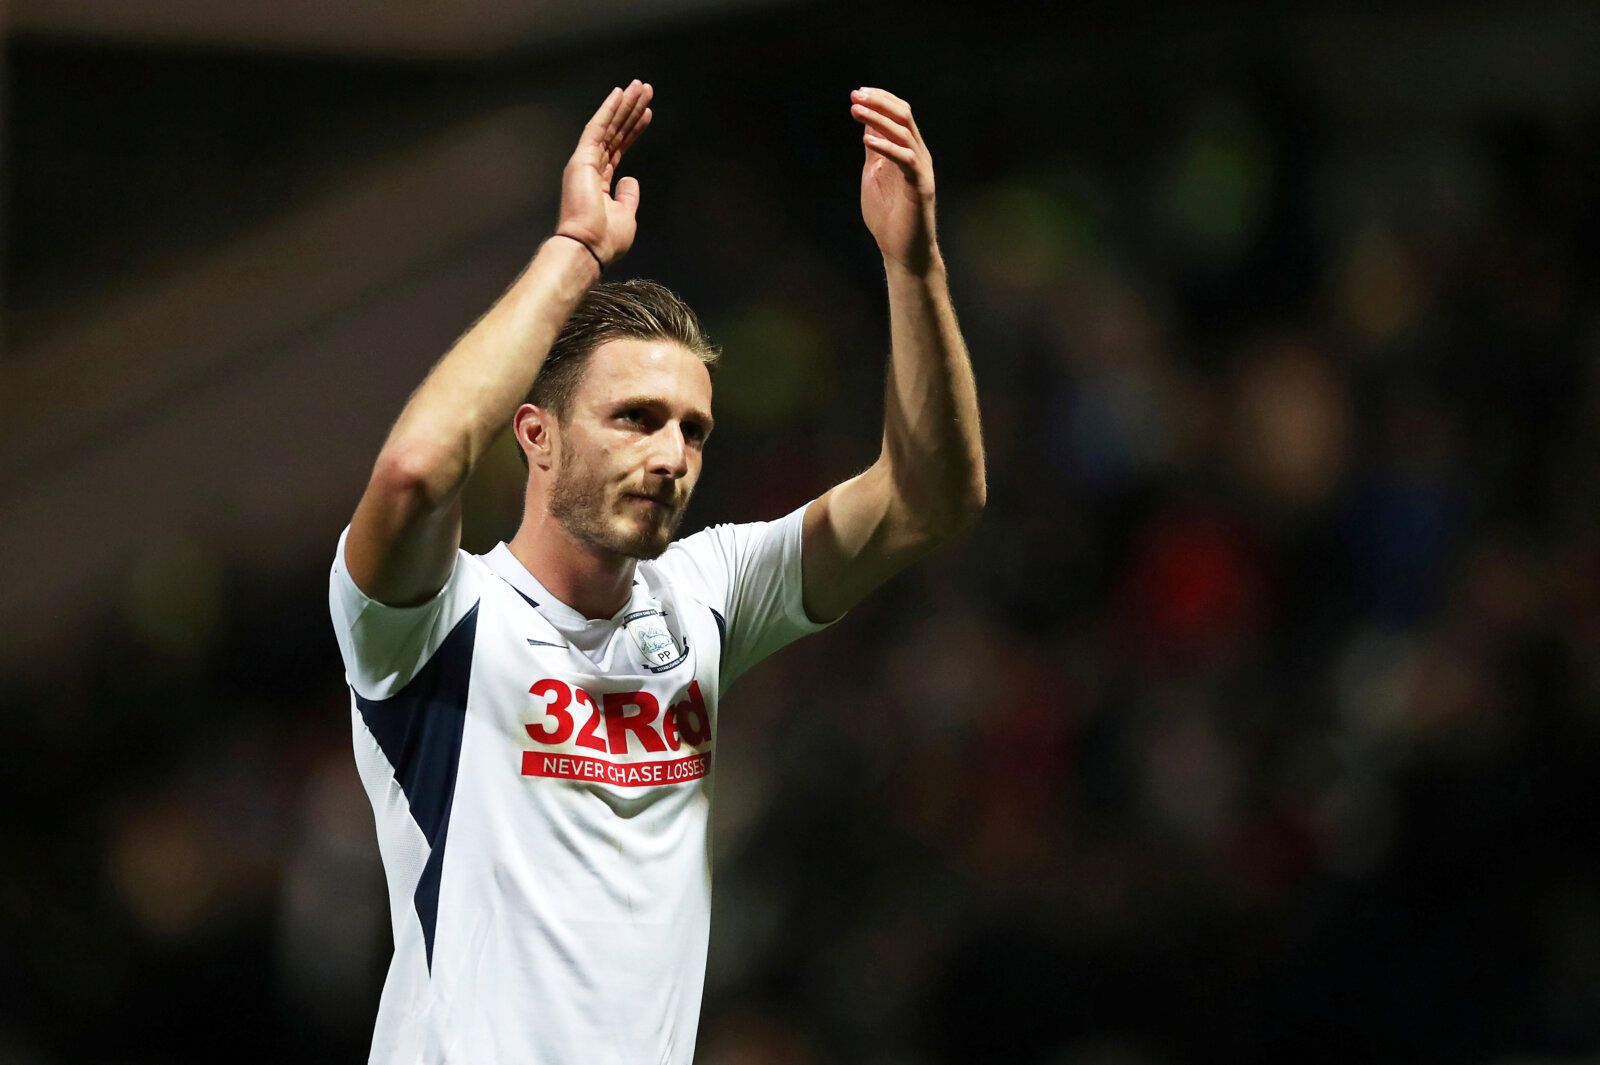 FILE PHOTO: Soccer Football - Championship - Preston North End v Leeds United - Deepdale, Preston, Britain - October 22, 2019   Preston North End's Ben Davies applauds fans after the match   Action Images via Reuters/John Clifton    EDITORIAL USE ONLY. No use with unauthorized audio, video, data, fixture lists, club/league logos or 